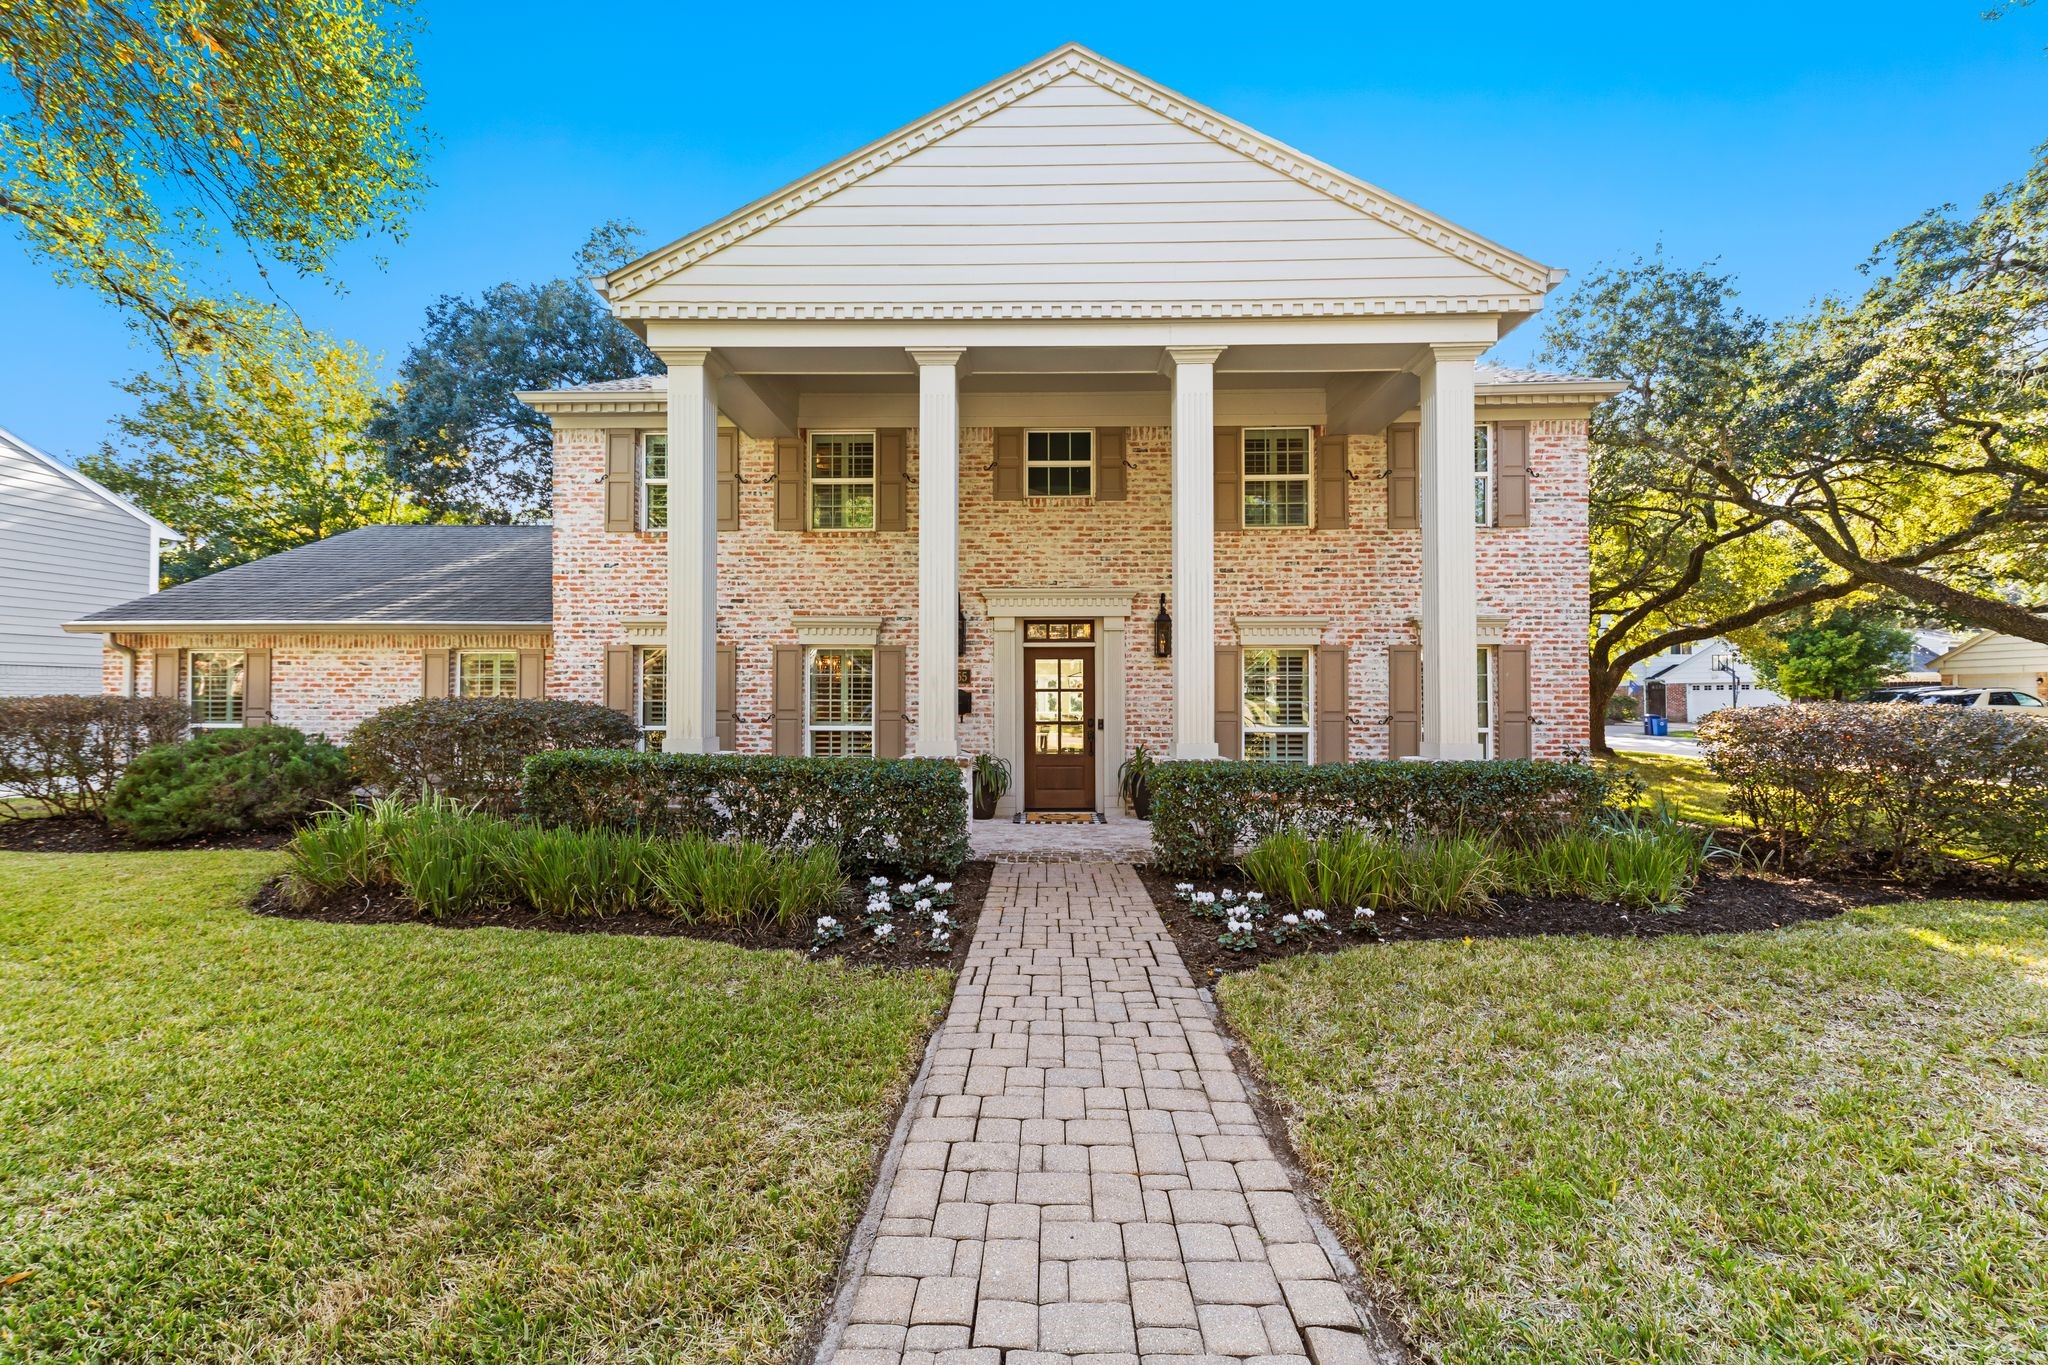 Welcome to 14355 Carolcrest! This property is perfectly situated on a 10,120 sqft corner lot. This well appointed property has been updated from top to bottom. Notice the beautiful German smeared masonry and stunning shutters.